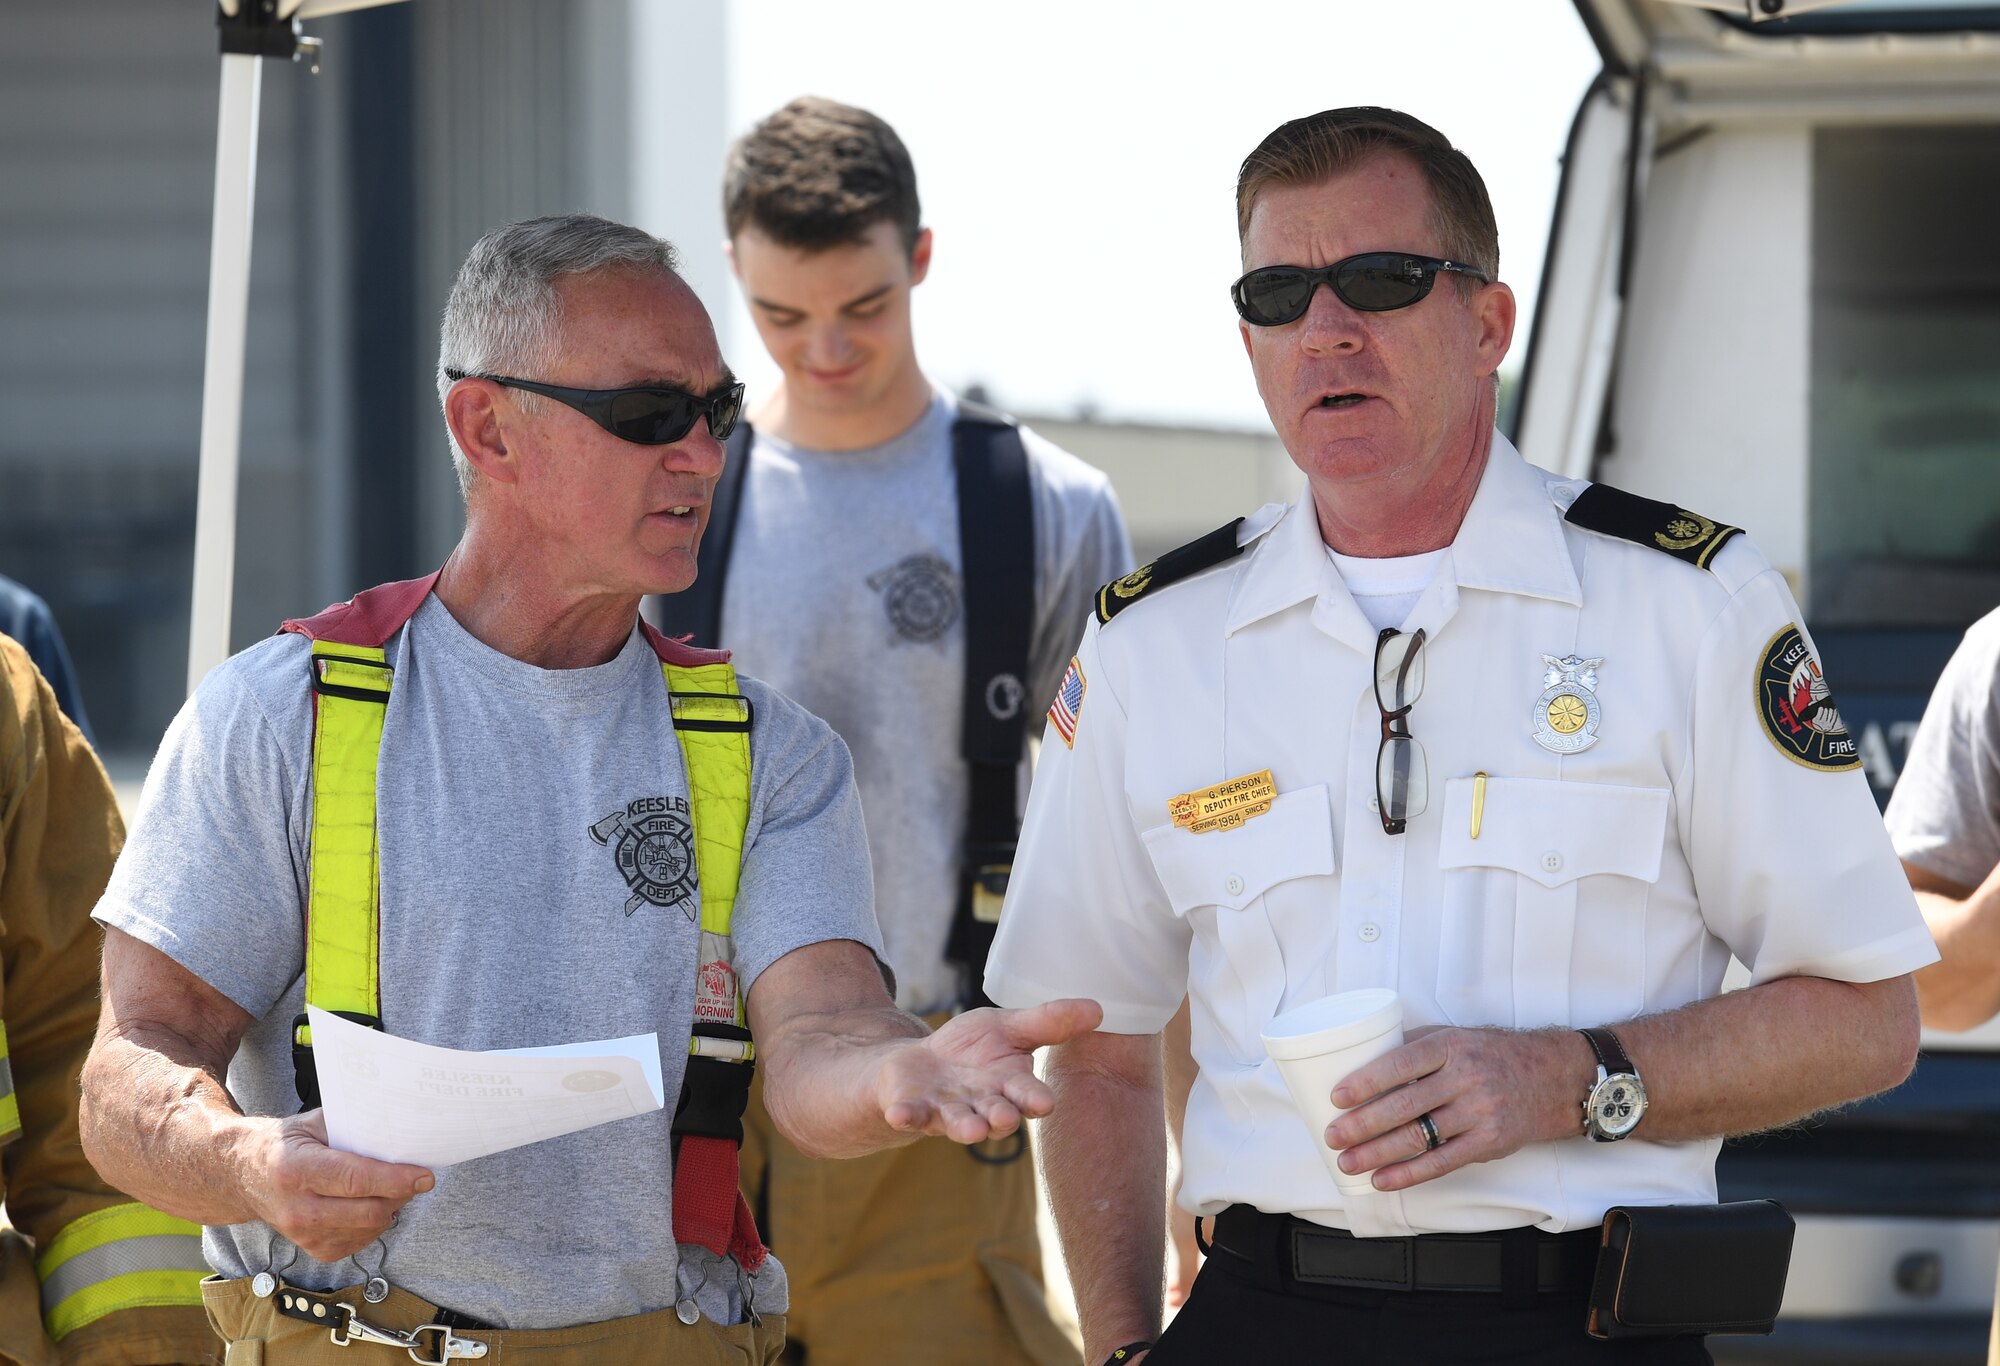 Rusty Bell, 81st Infrastructure Division firefighter, and Gary Pierson, 81st ID deputy fire chief, discuss approaching procedures during an aircraft rescue fire fighting training on Keesler Air Force Base, Mississippi, June 4, 2019. The joint agency training allowed the Keesler Fire Department, Gulfport Combat Readiness Training Center Fire Department, Stennis Airport Fire Department and the U.S. Naval Air Station Pensacola Gulf Coast Fire Rescue to meet the semi-annual training requirement to practice aircraft rescue and live fire training evolutions. (U.S. Air Force photo by Kemberly Groue)